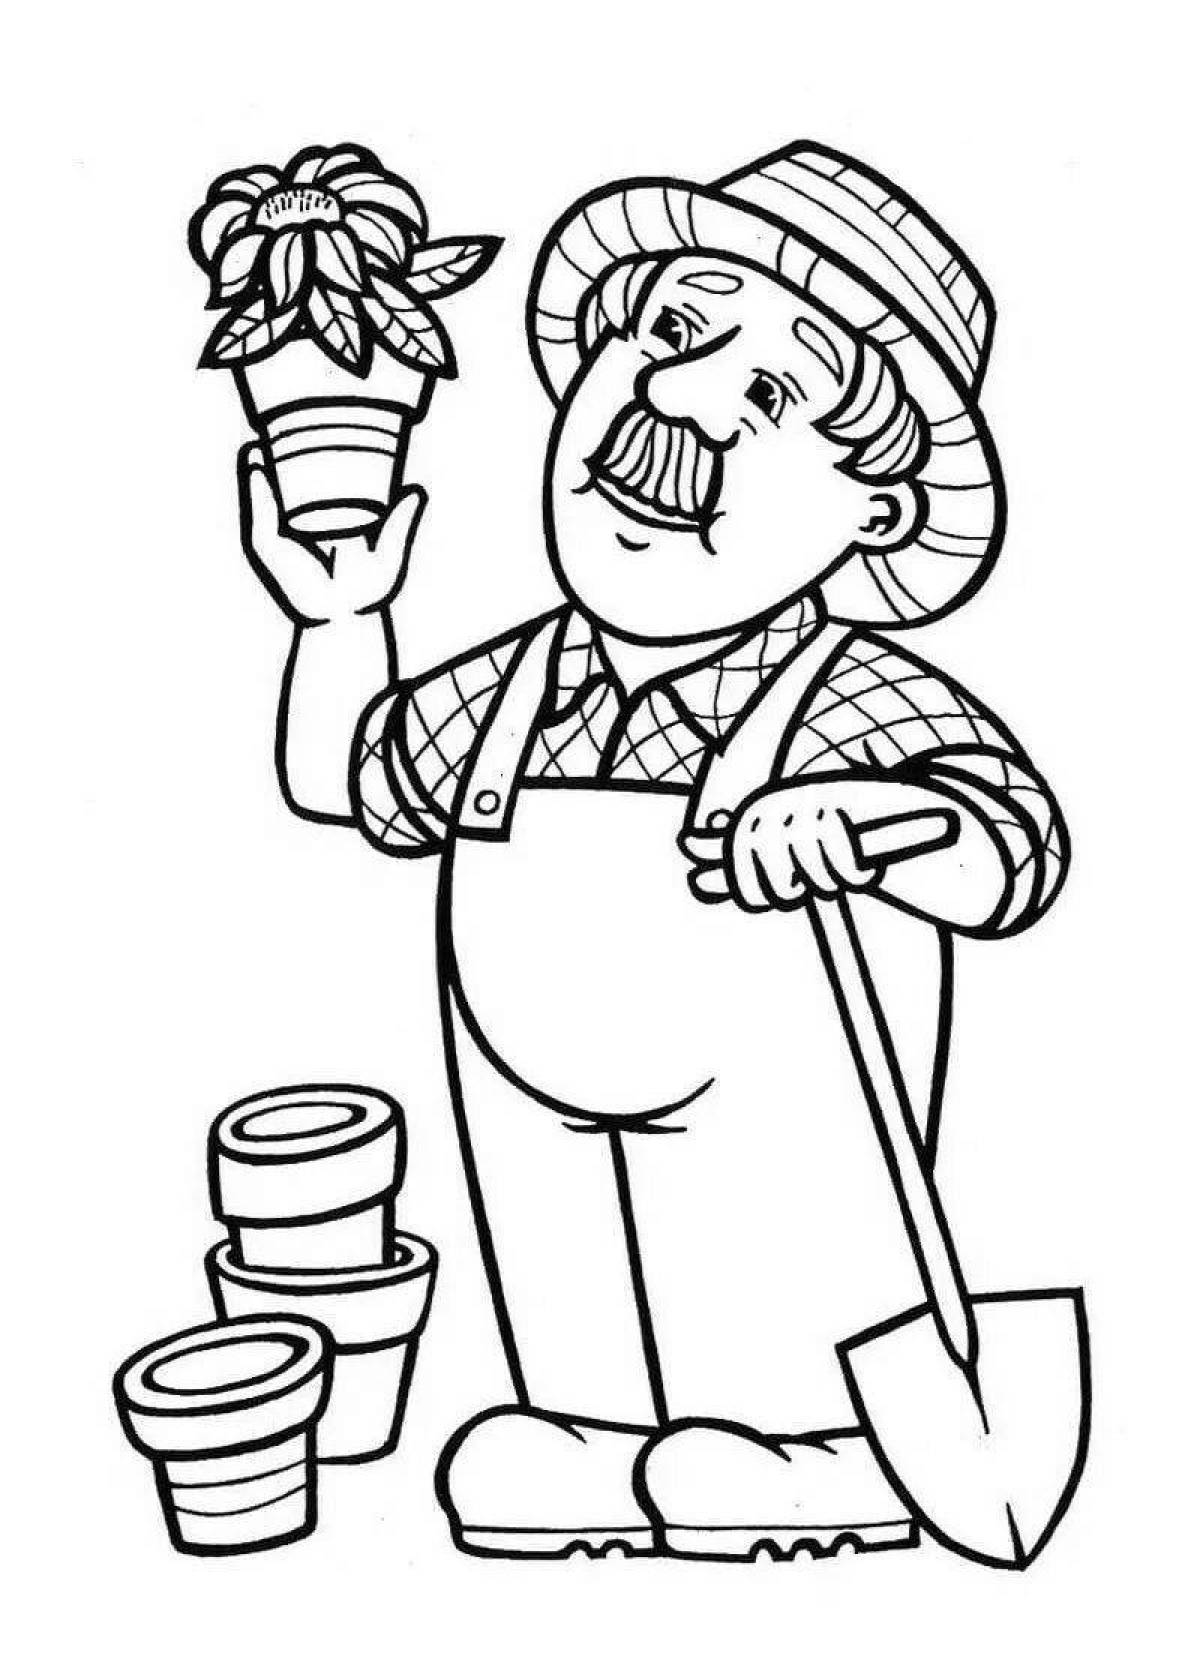 Playful farmer coloring book for kids